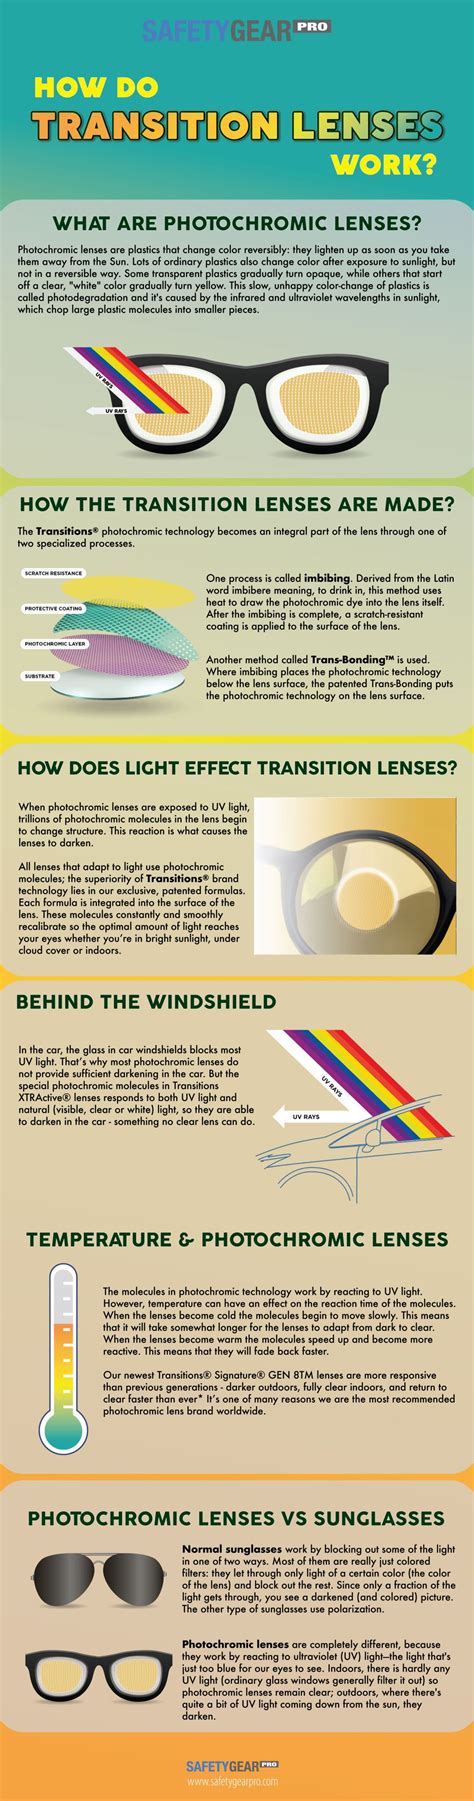 how photochromic transition lenses work safety gear pro